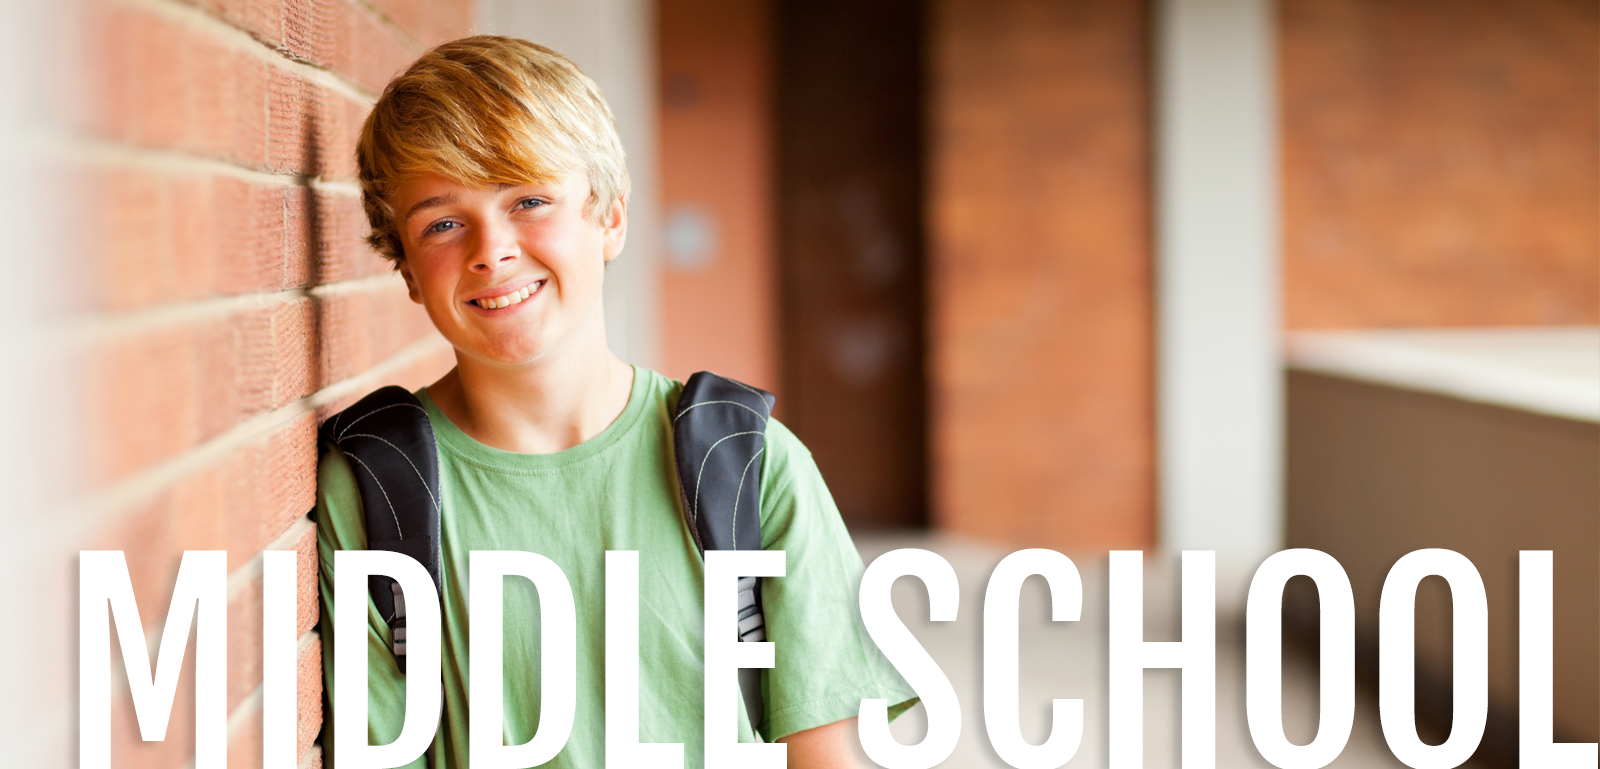 Middle School Boy with backpack, smiling